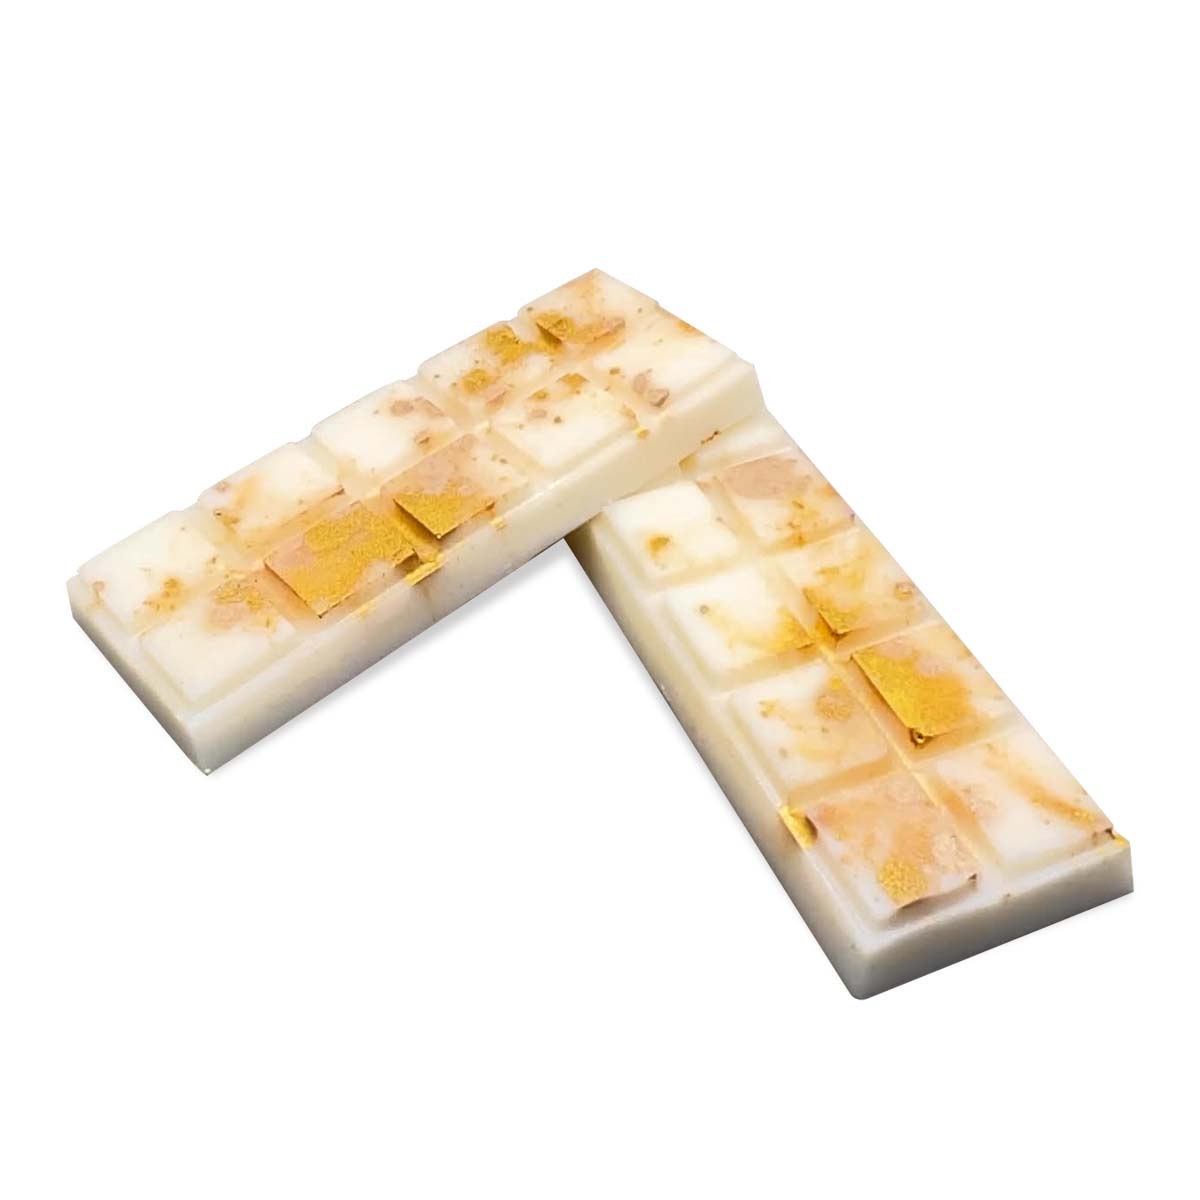 Feel the warmth with our unwrapped Banana Pie Snap Bar. Crafted from natural soy wax, it exudes a golden-brown allure.